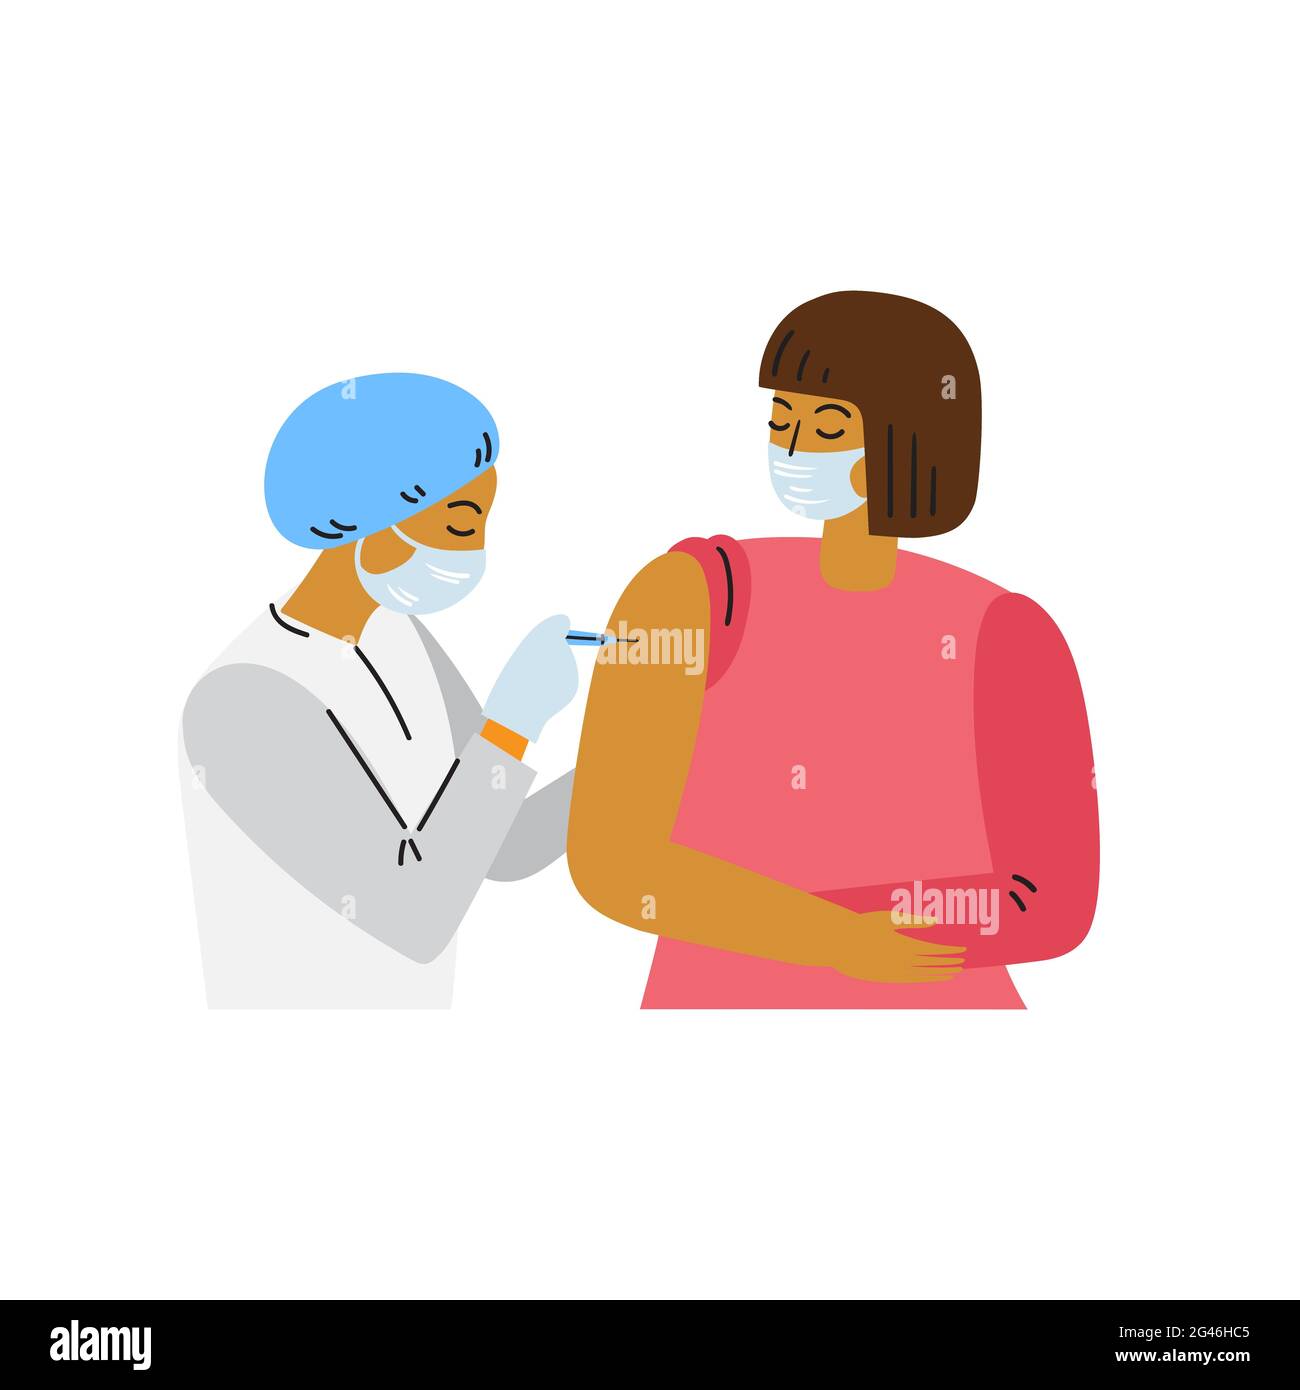 Coronavirus vaccination, doctor,patient.Process of immunization against covid-19. Isolated flat vector illustration isolated on white background.Stock Stock Photo